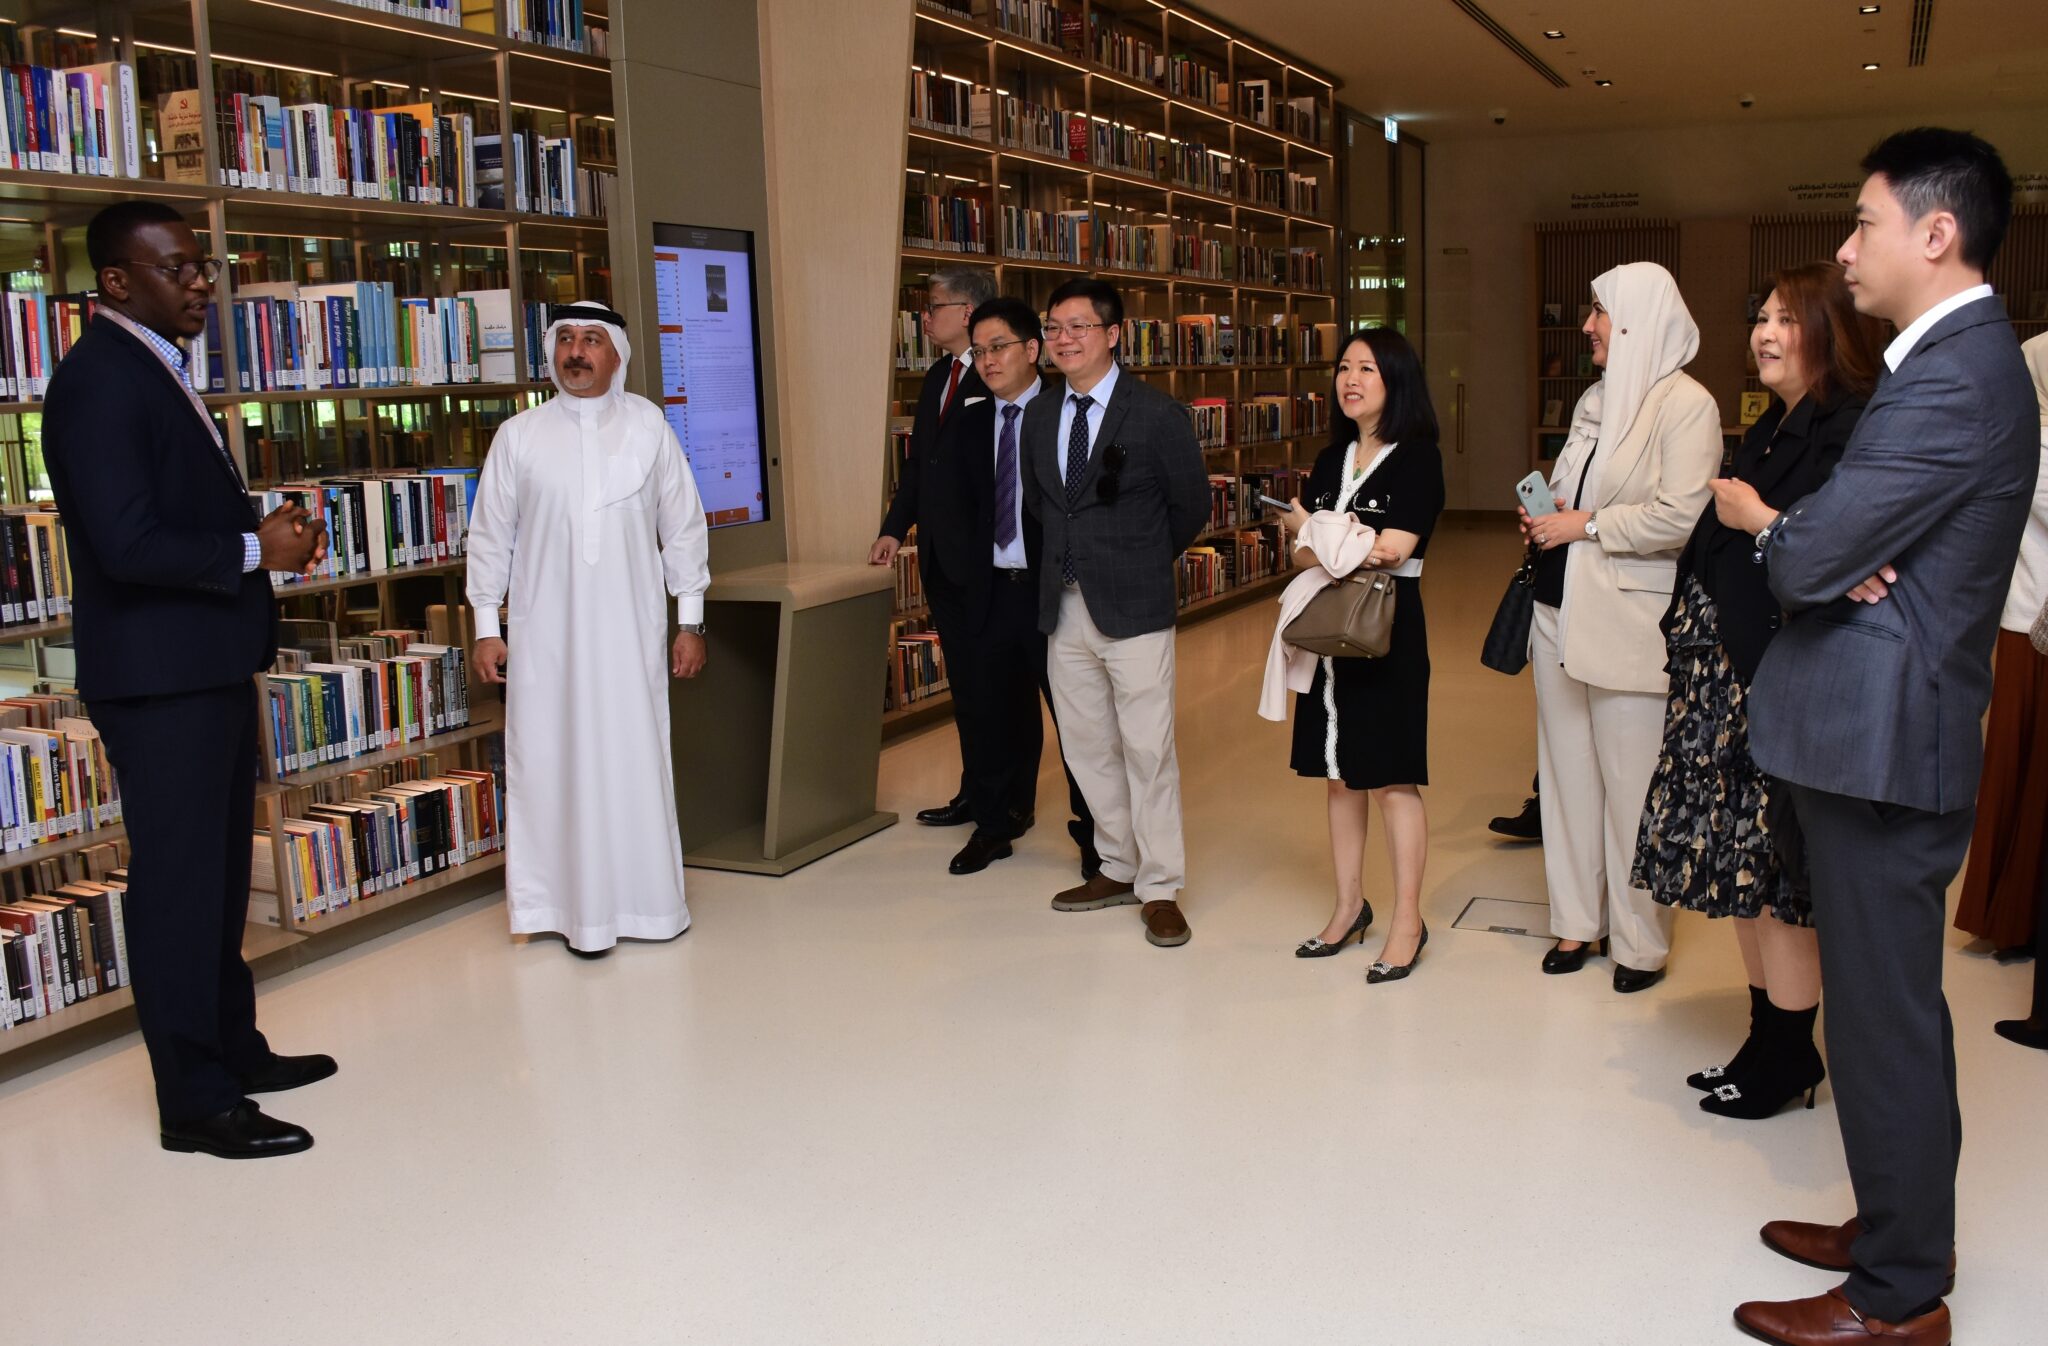 The Invest in Sharjah team guiding the delegation through an enlightening tour of the House of Wisdom